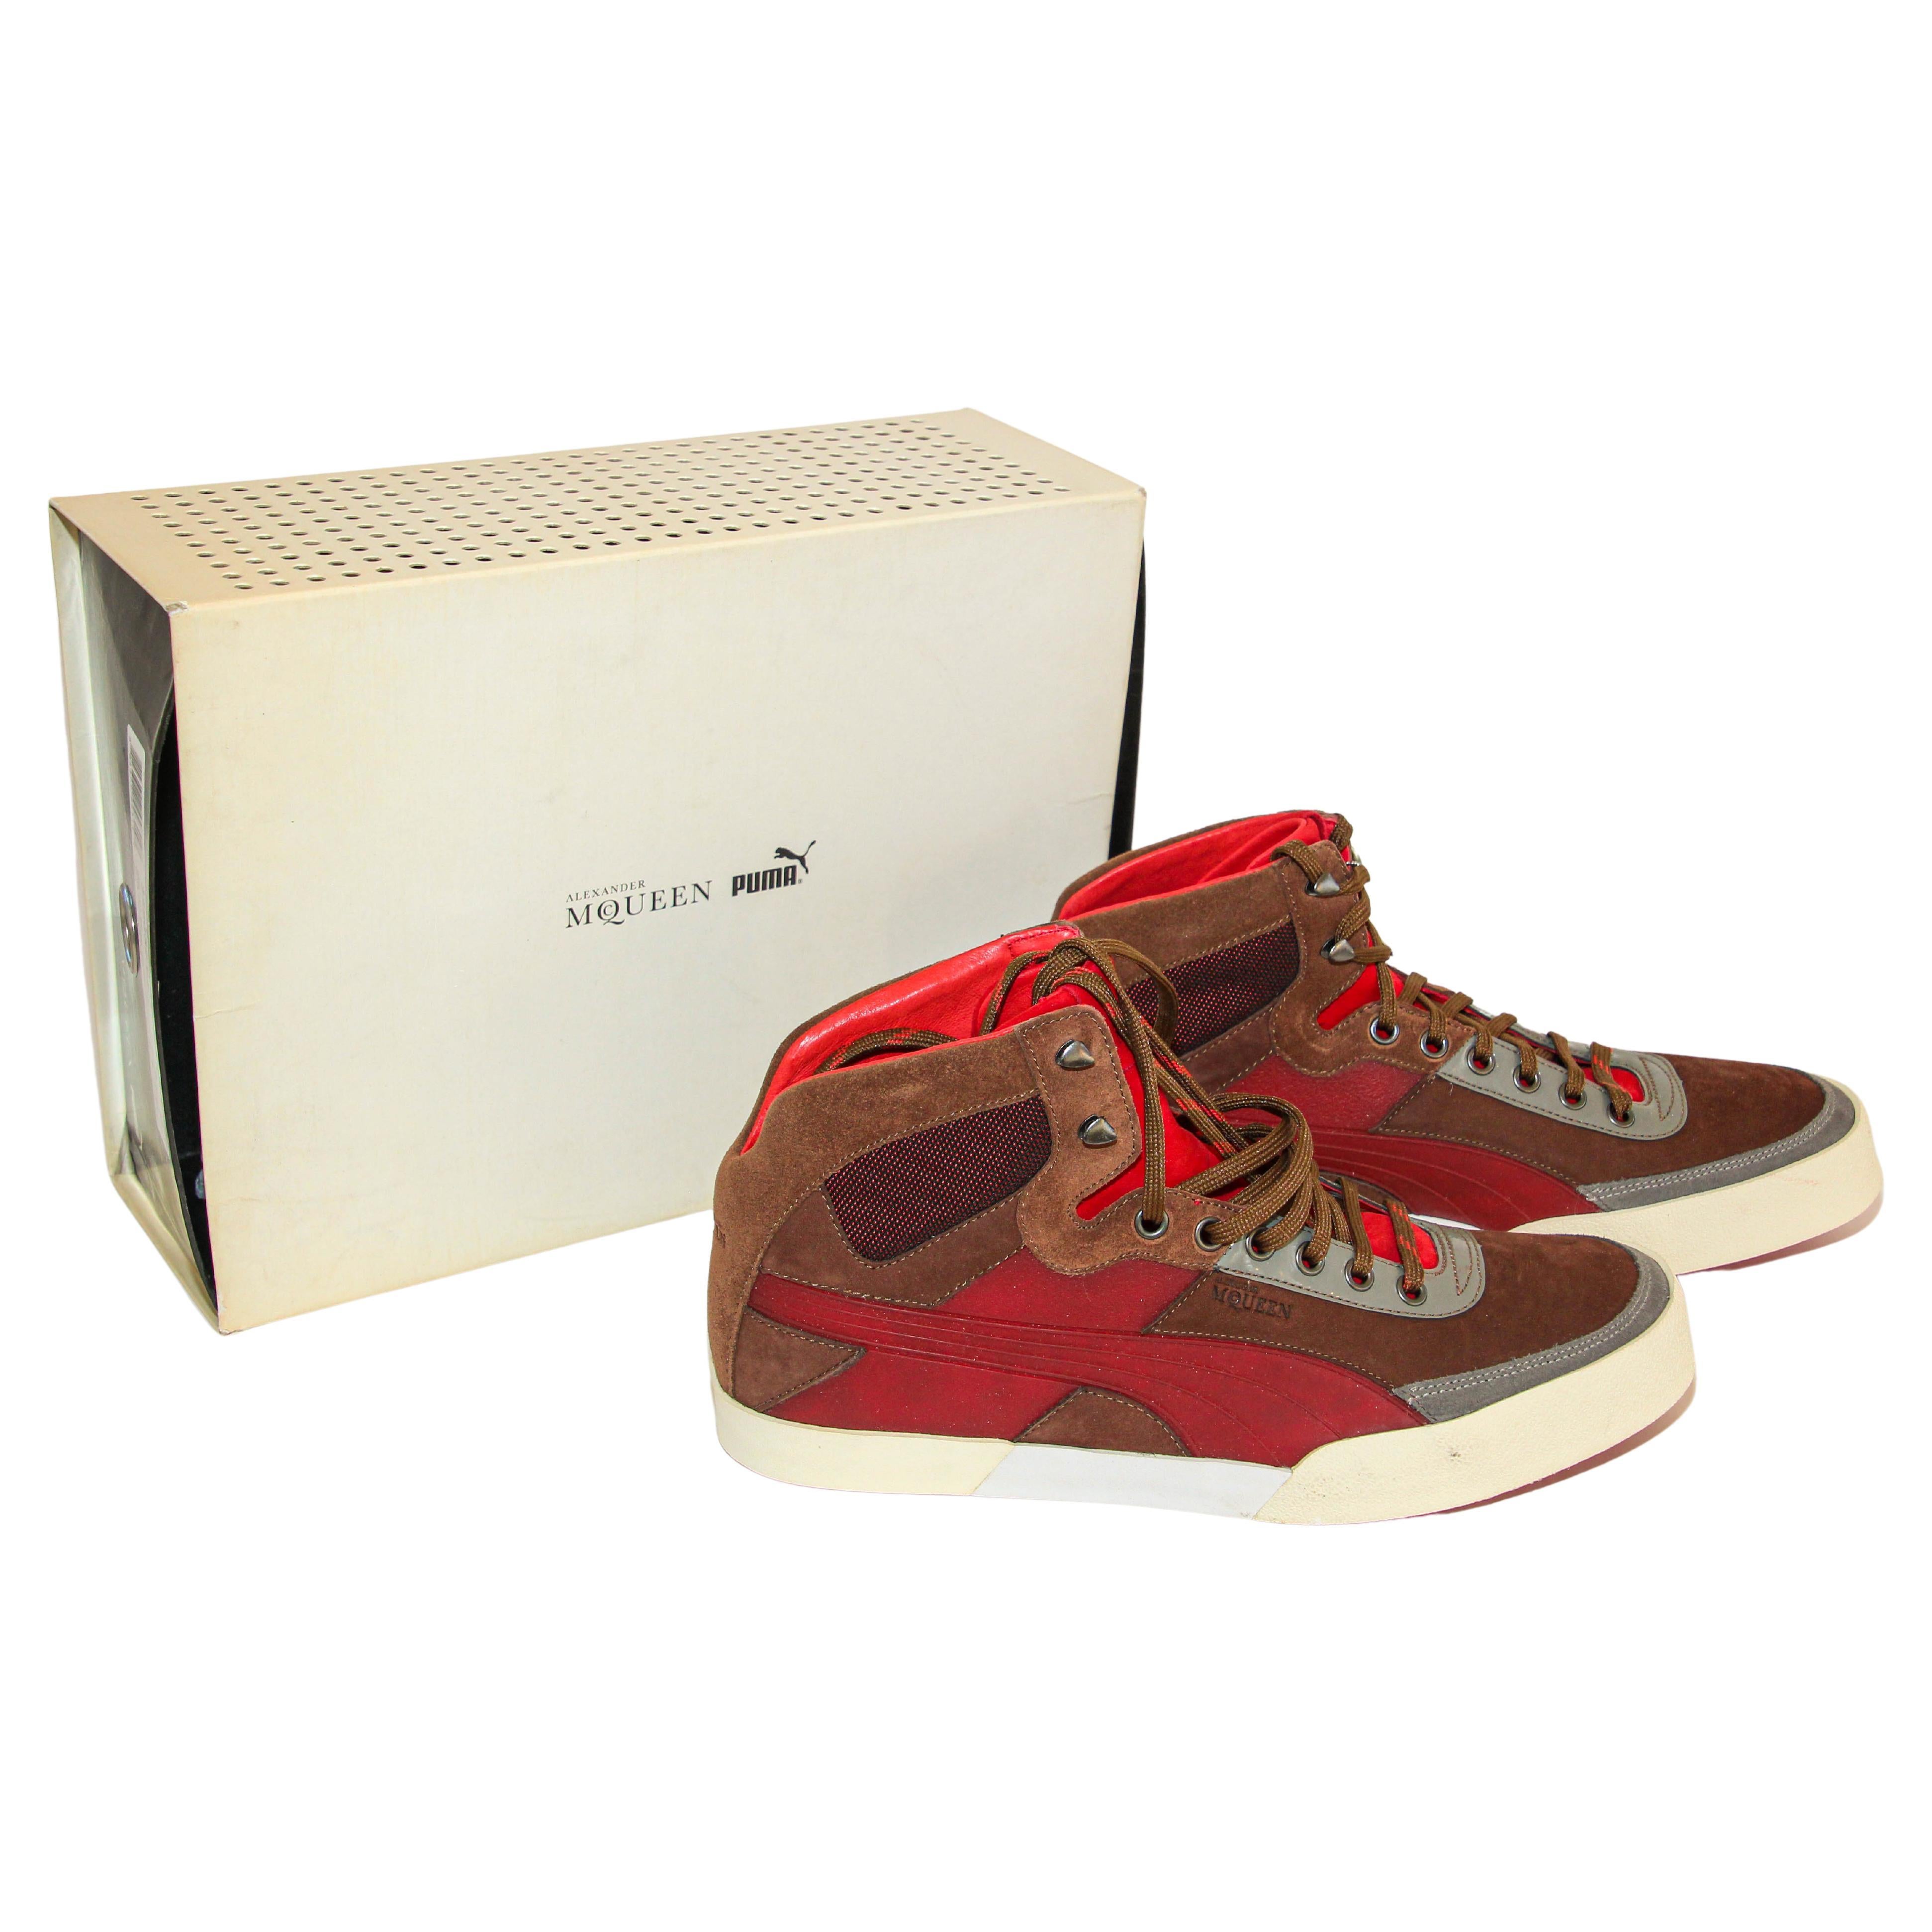 Alexander McQueen X Puma AMQ Trail Trainer Mid- Top Sneakers Brown and Red Suede.
Alexander McQueen Puma,  never worn, new in box.
Alexander McQueen X Puma Sneaker
Size Men's / US 9 / EU 42
PUMA Alexander McQueen fashion sneakers, suede and